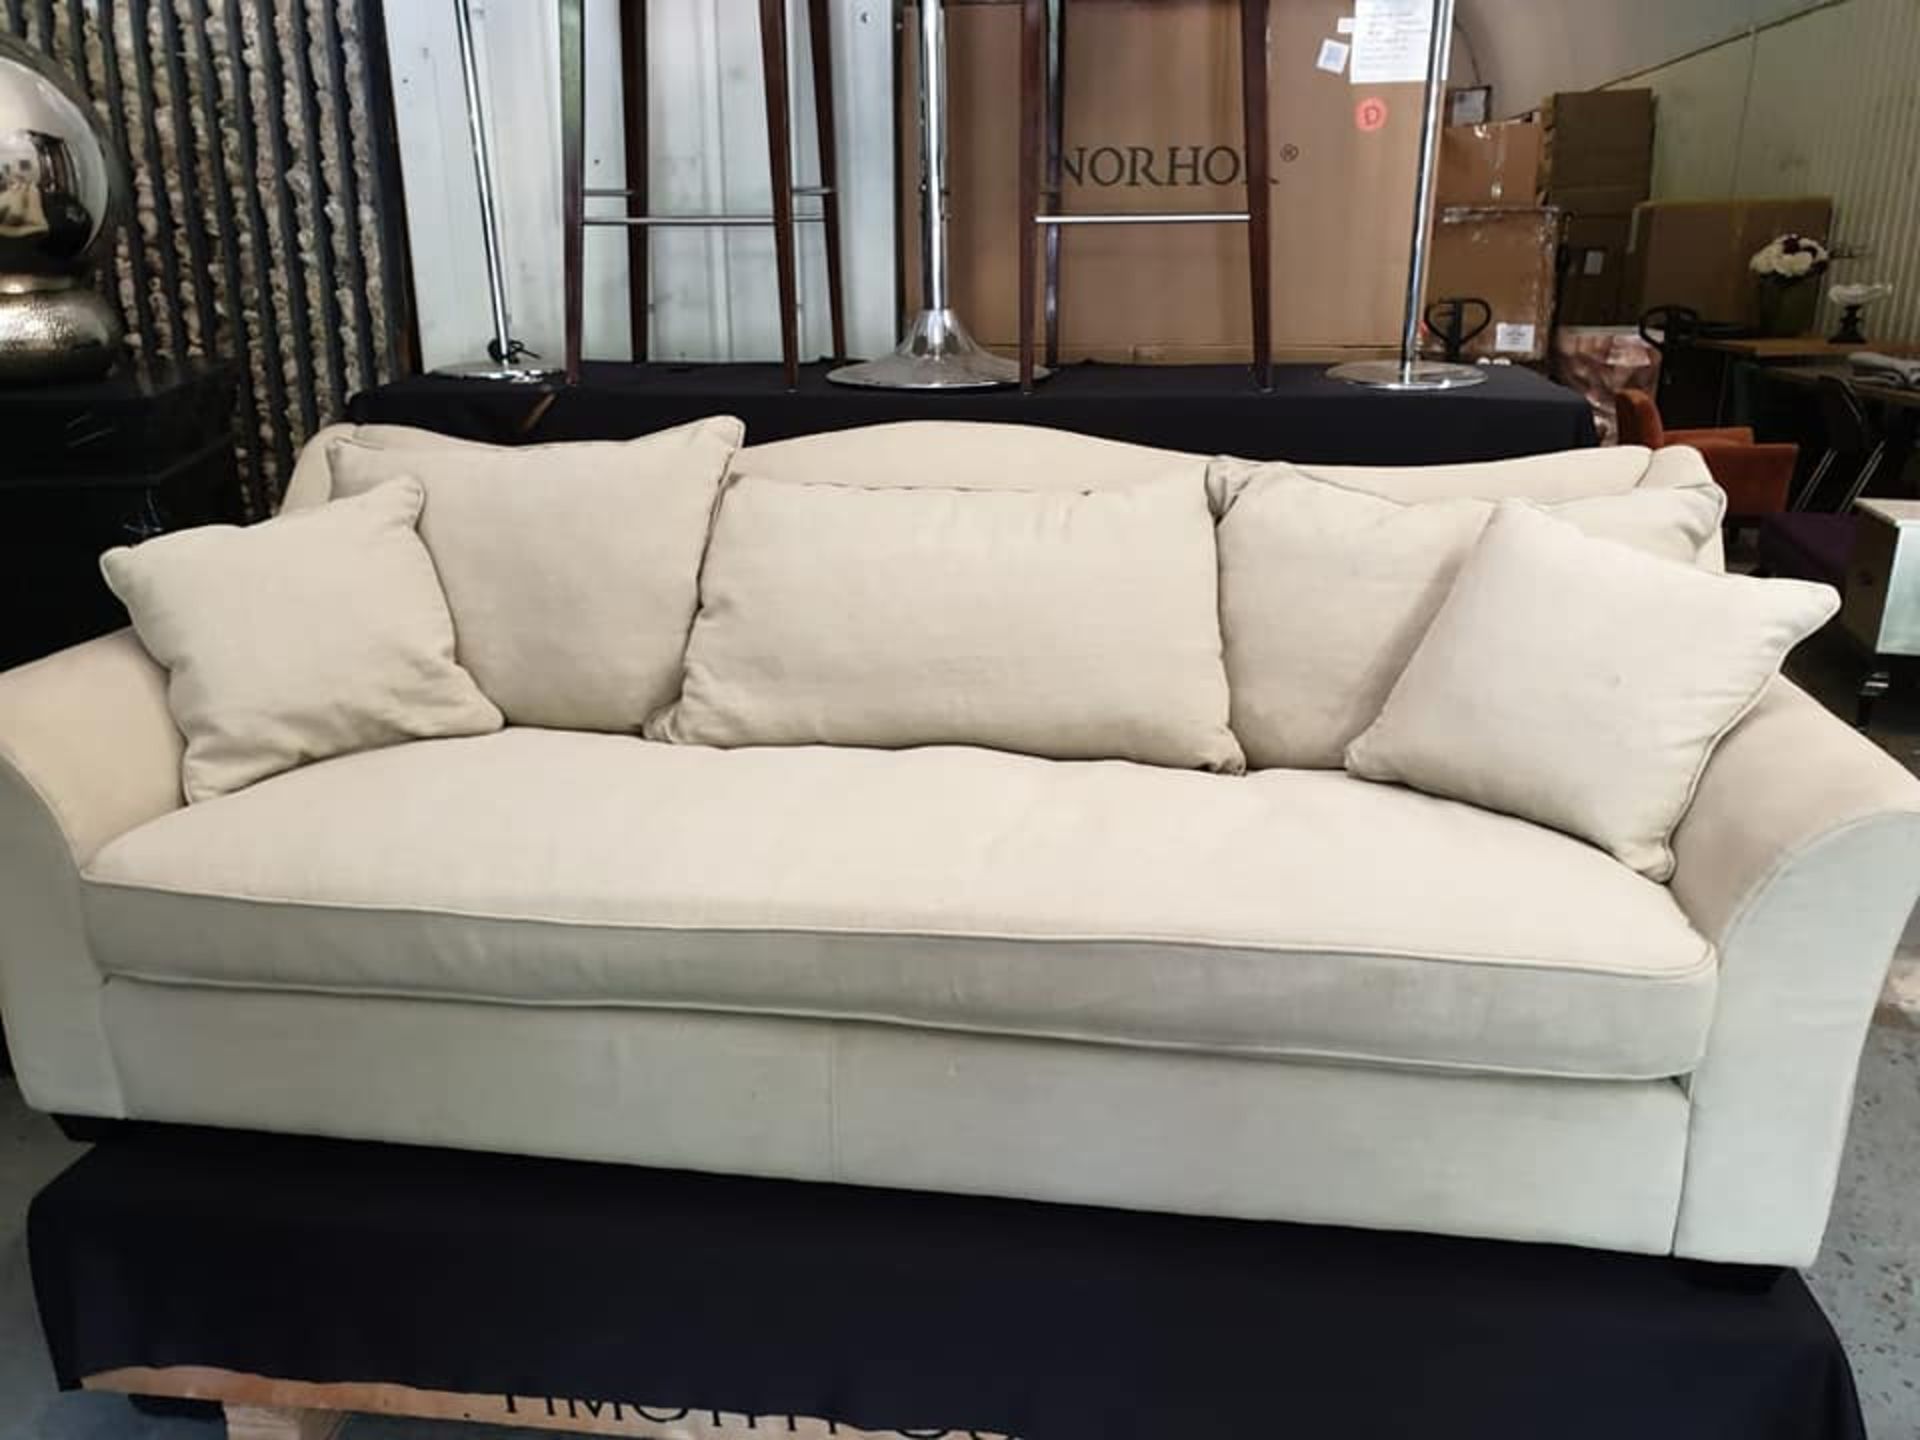 Concerto 3 Seater Upholstered Sofa Scrubbed Lime Stone A Serpentine Back Sofa With Back Loose - Image 2 of 3